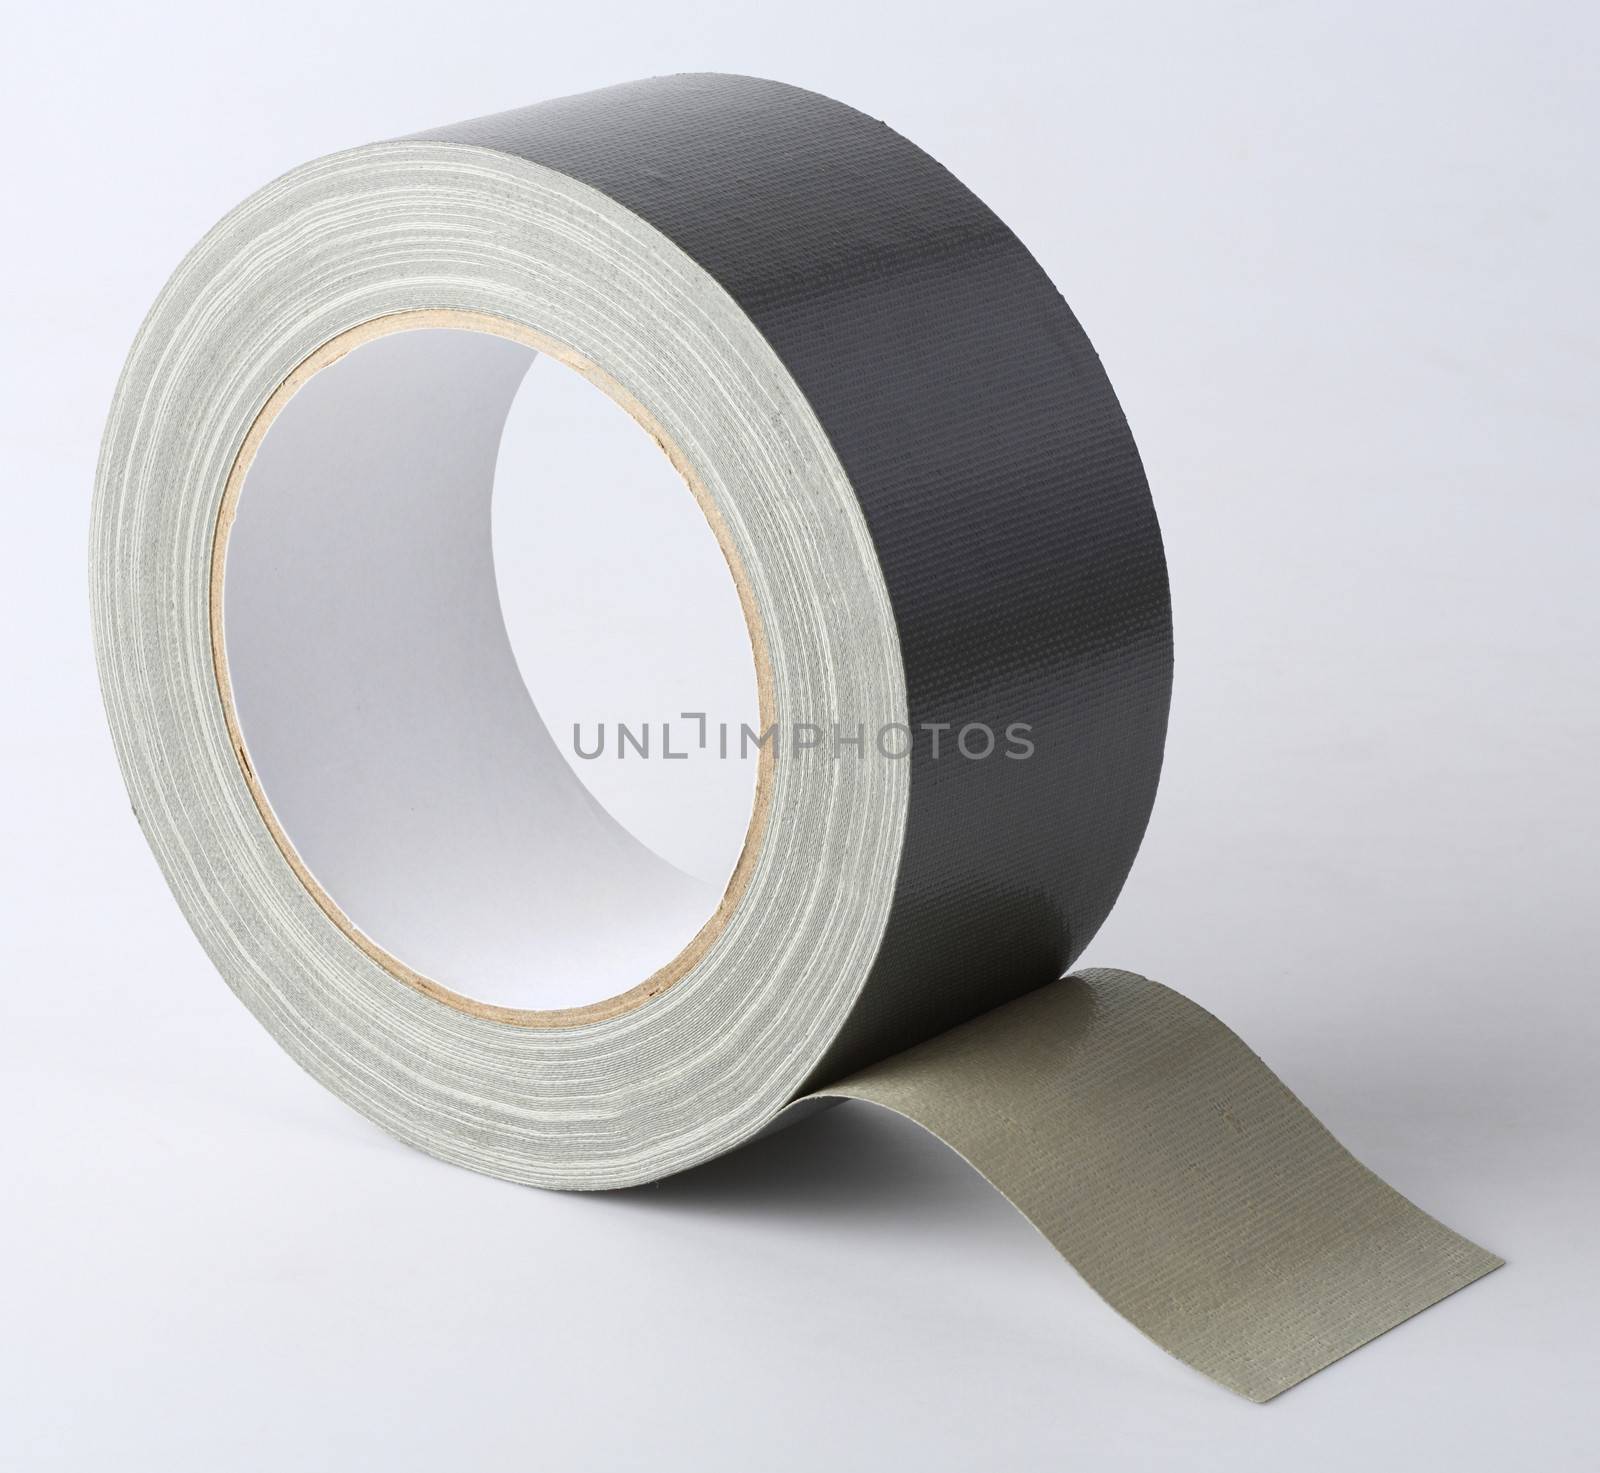 Silver color cloth tape (Duct Tape) isolated on white